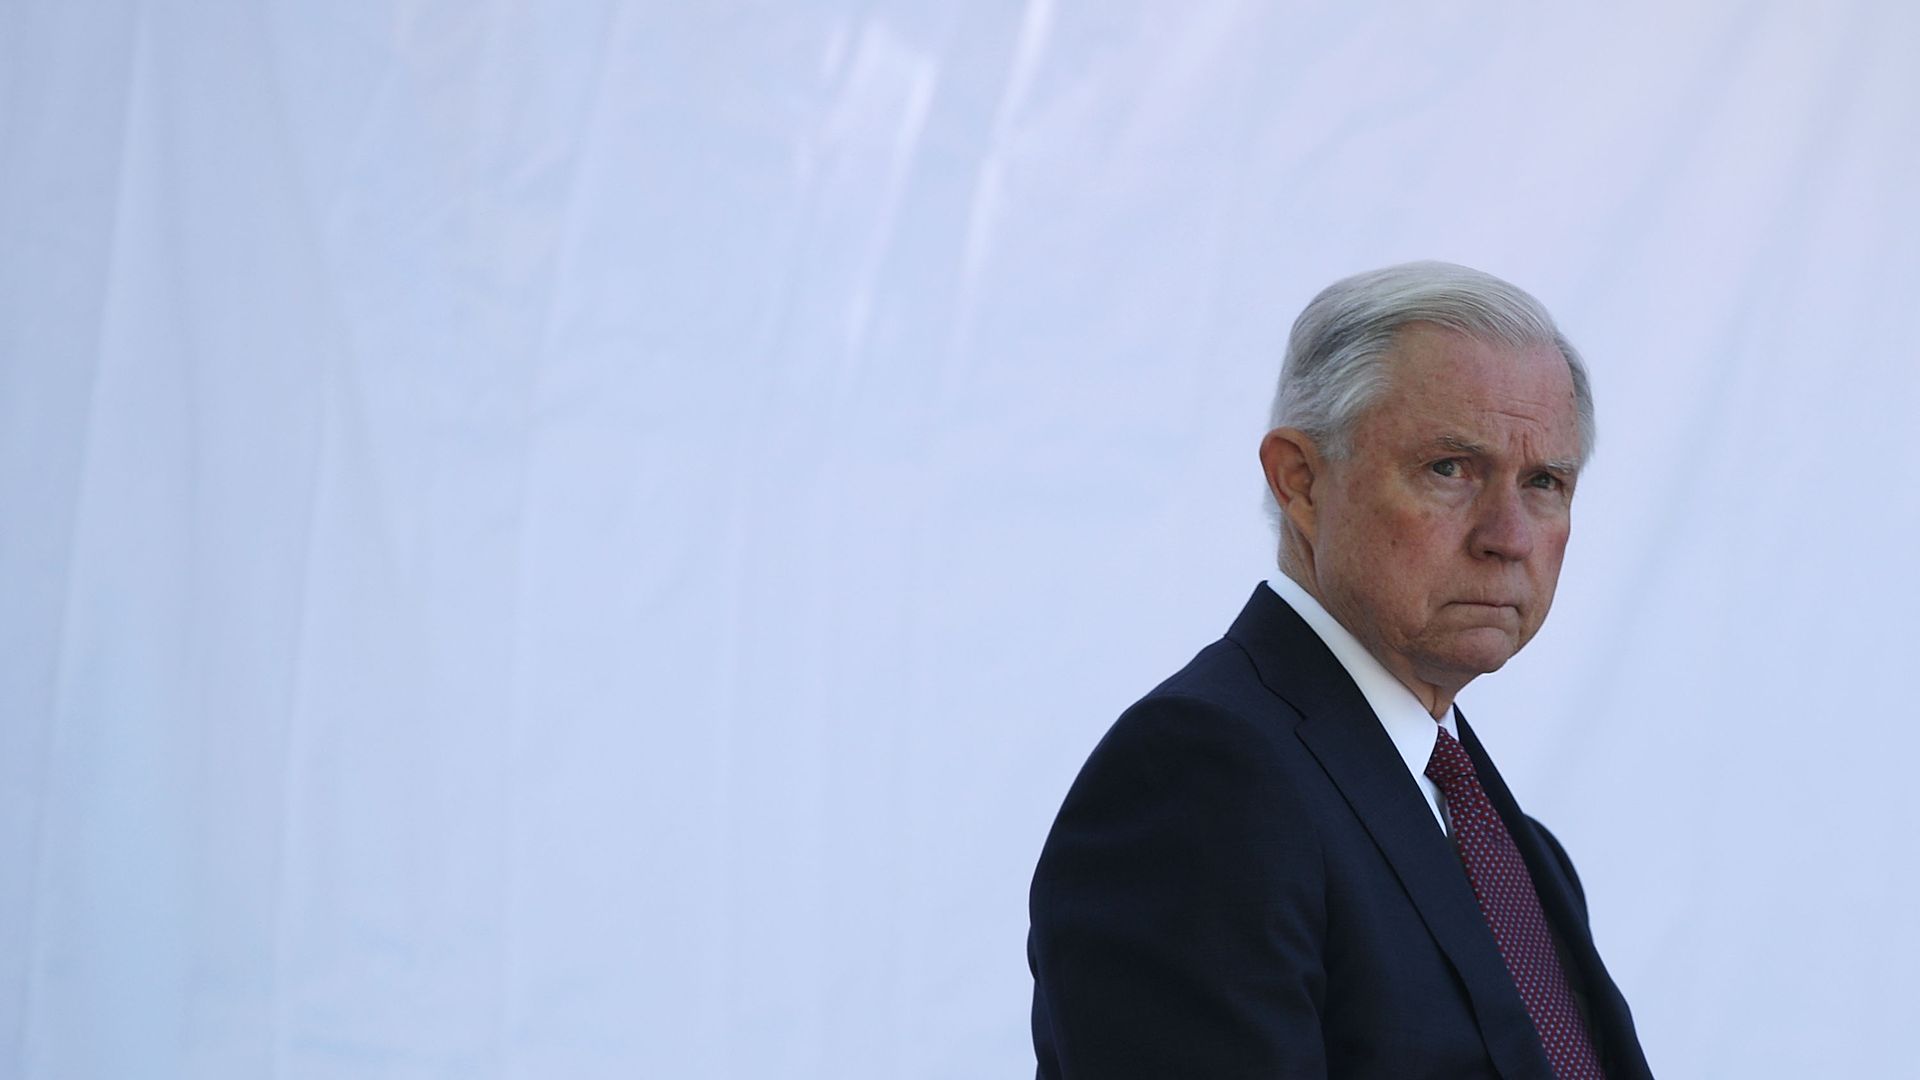 Jeff Sessions scowling 